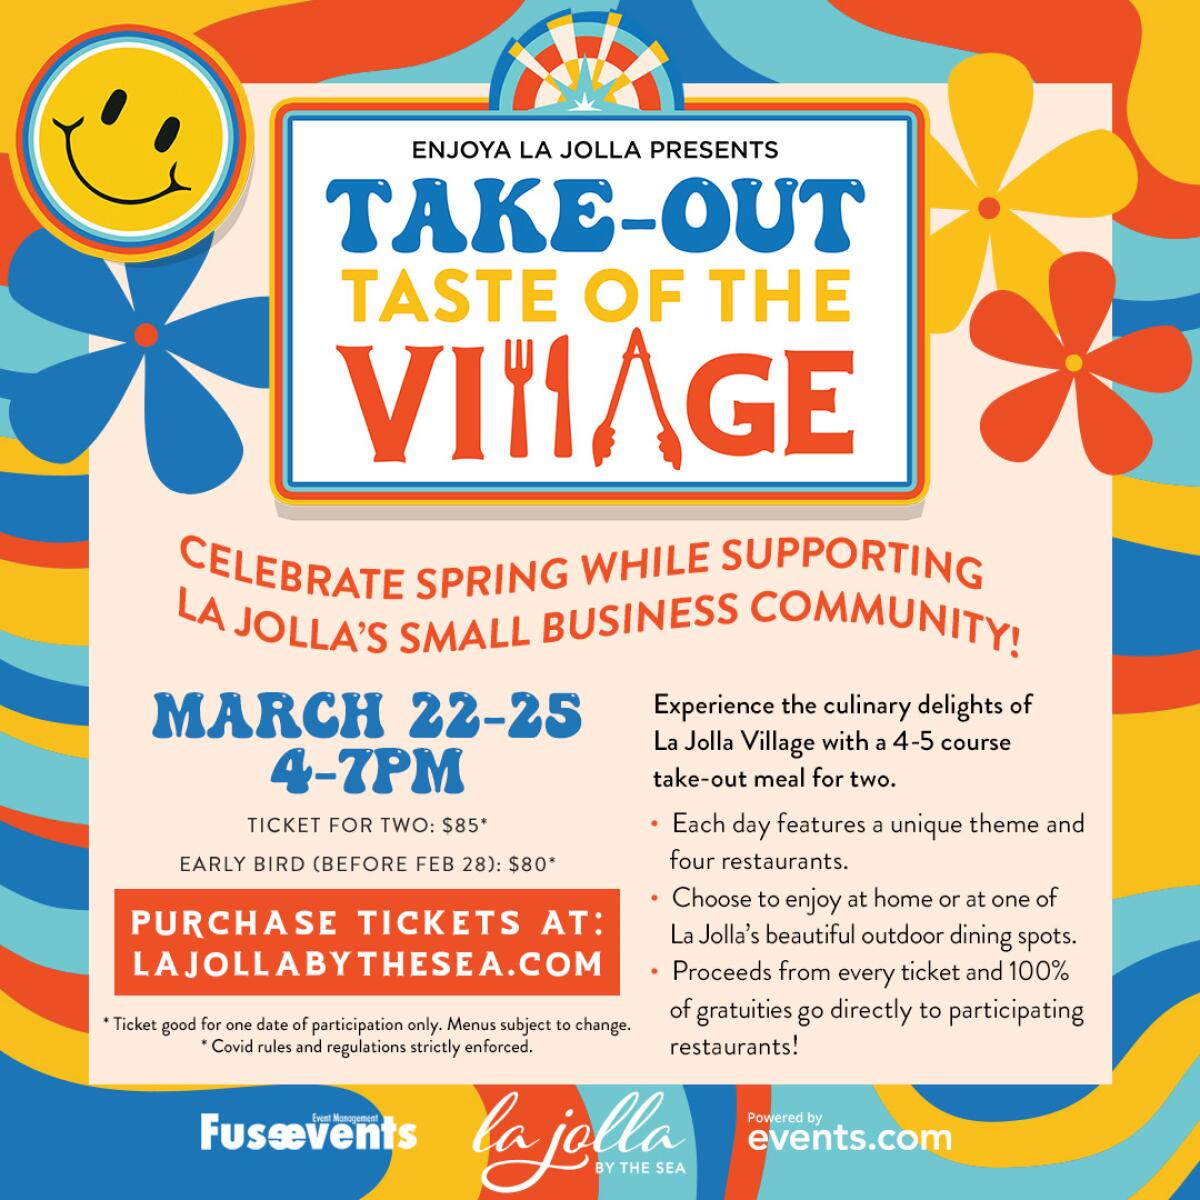 Take-Out Taste of The Village poster art